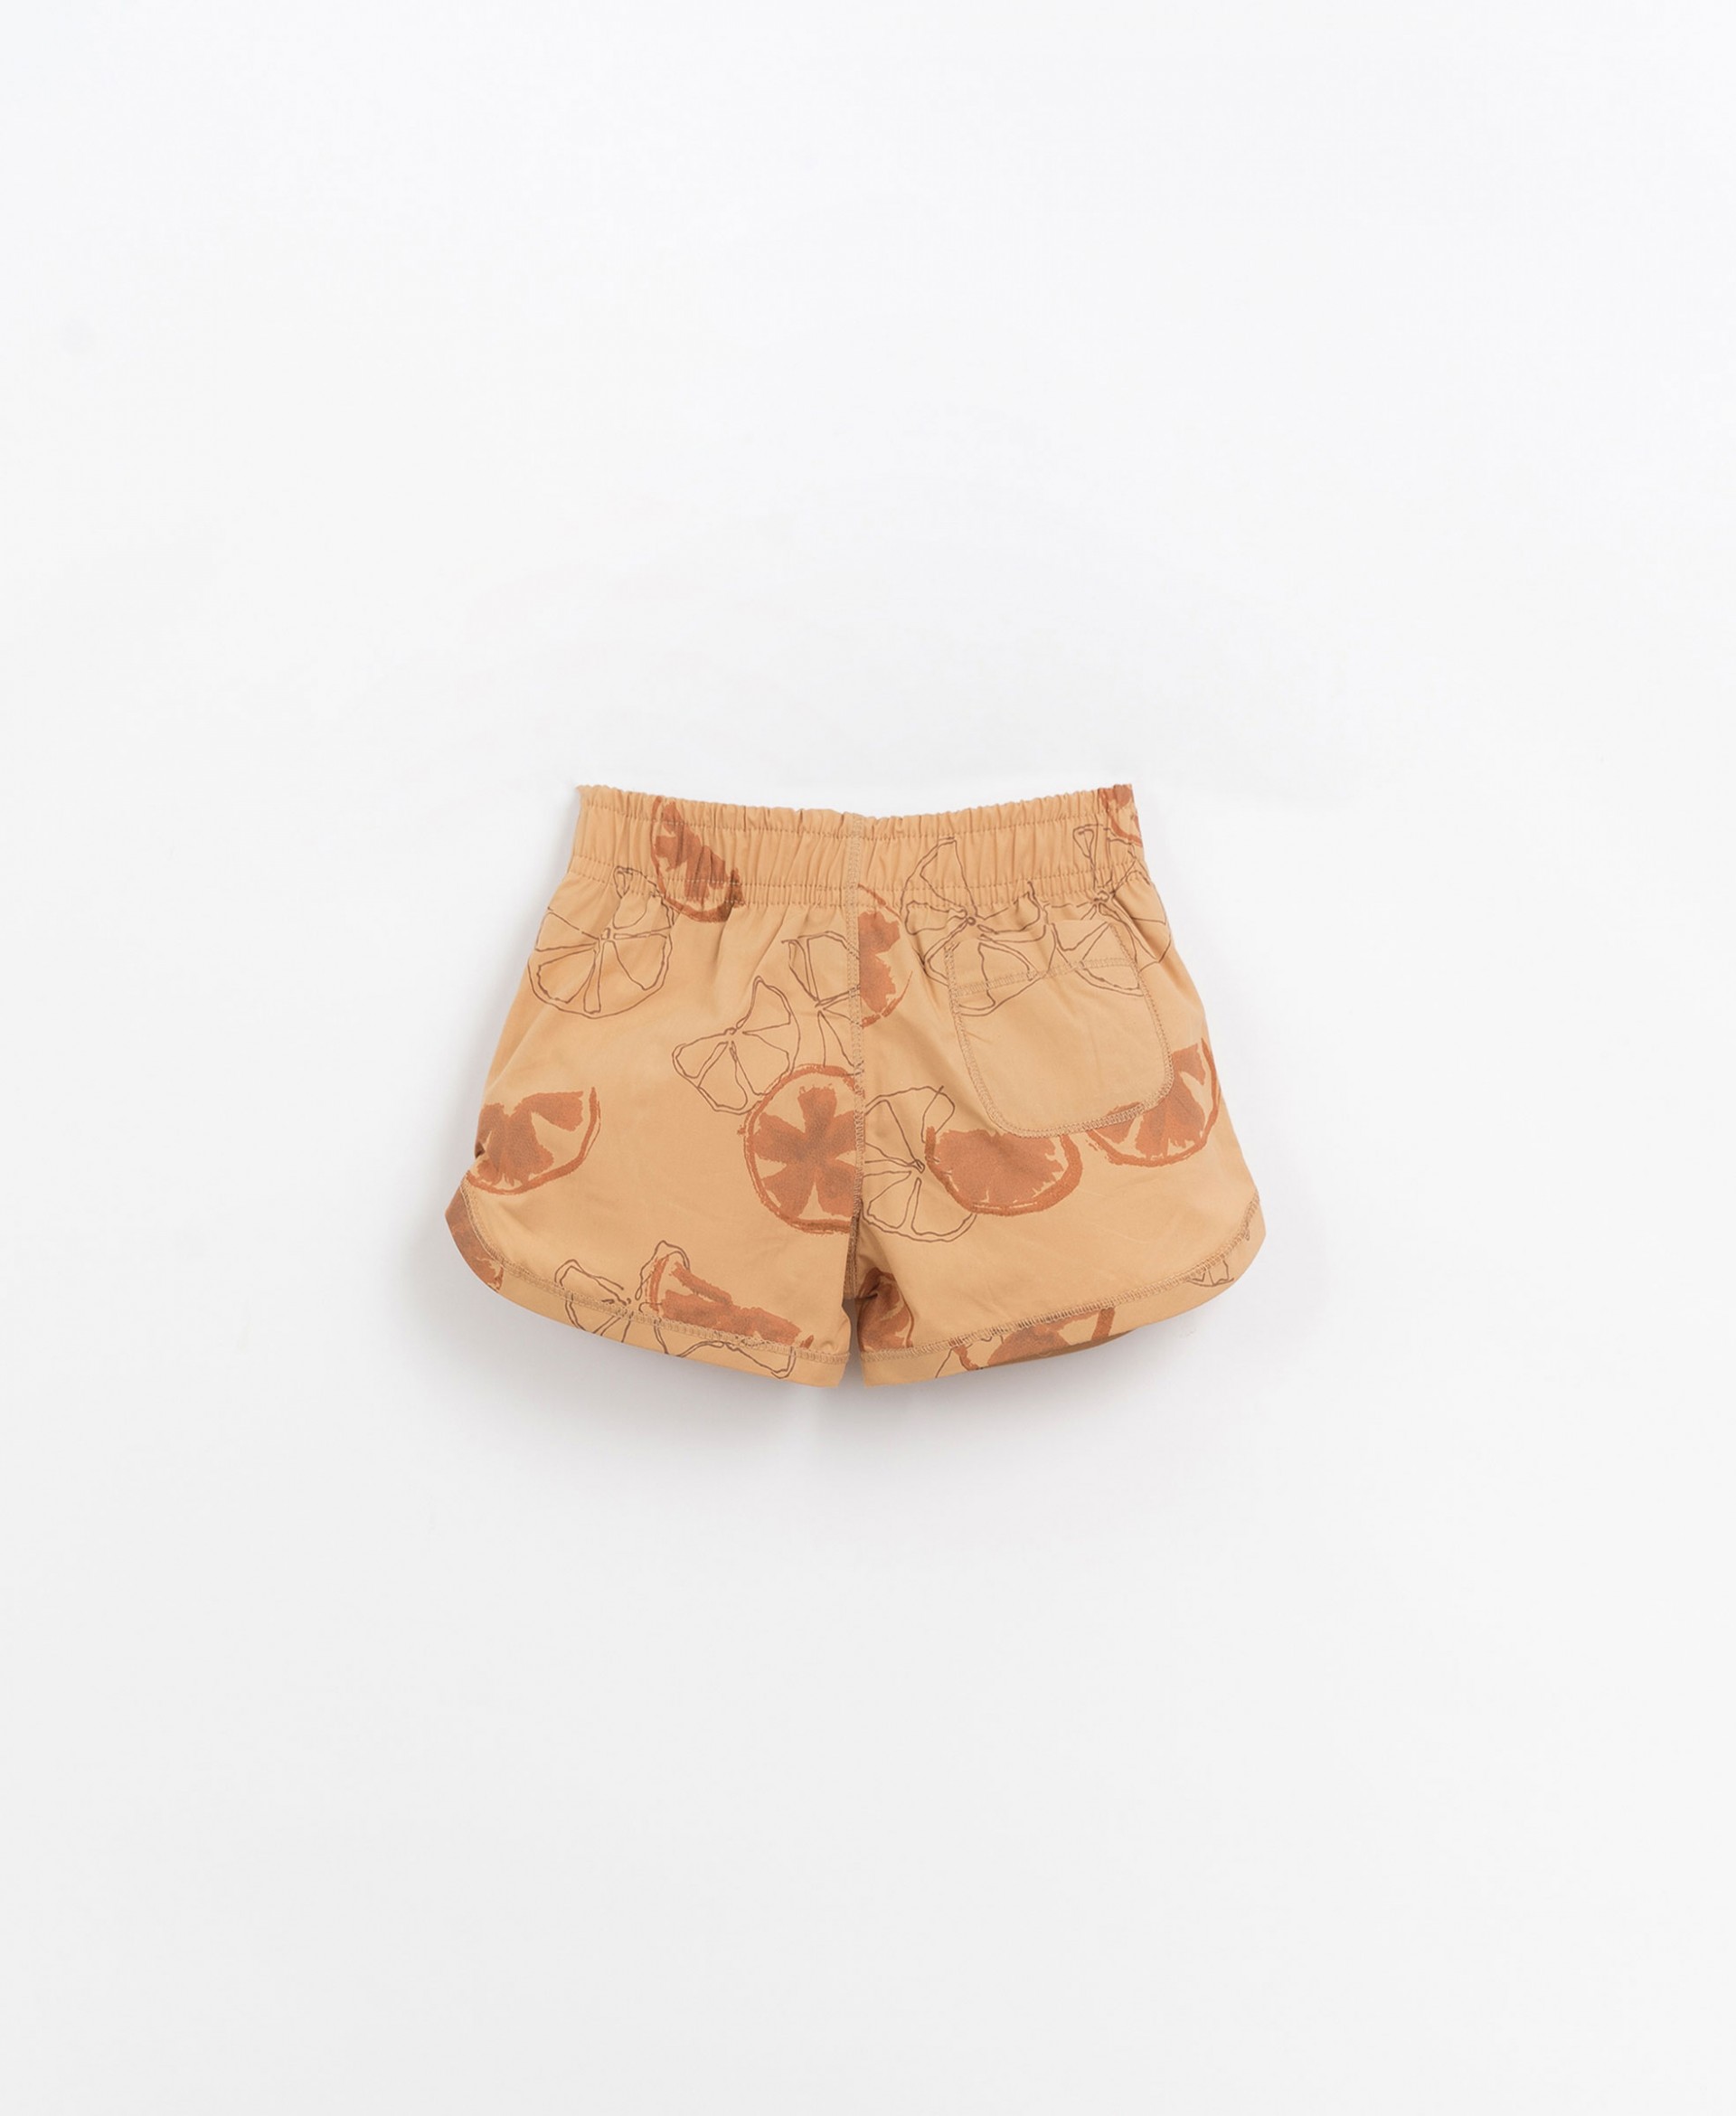 Swimming shorts with interior under pants | Organic Care